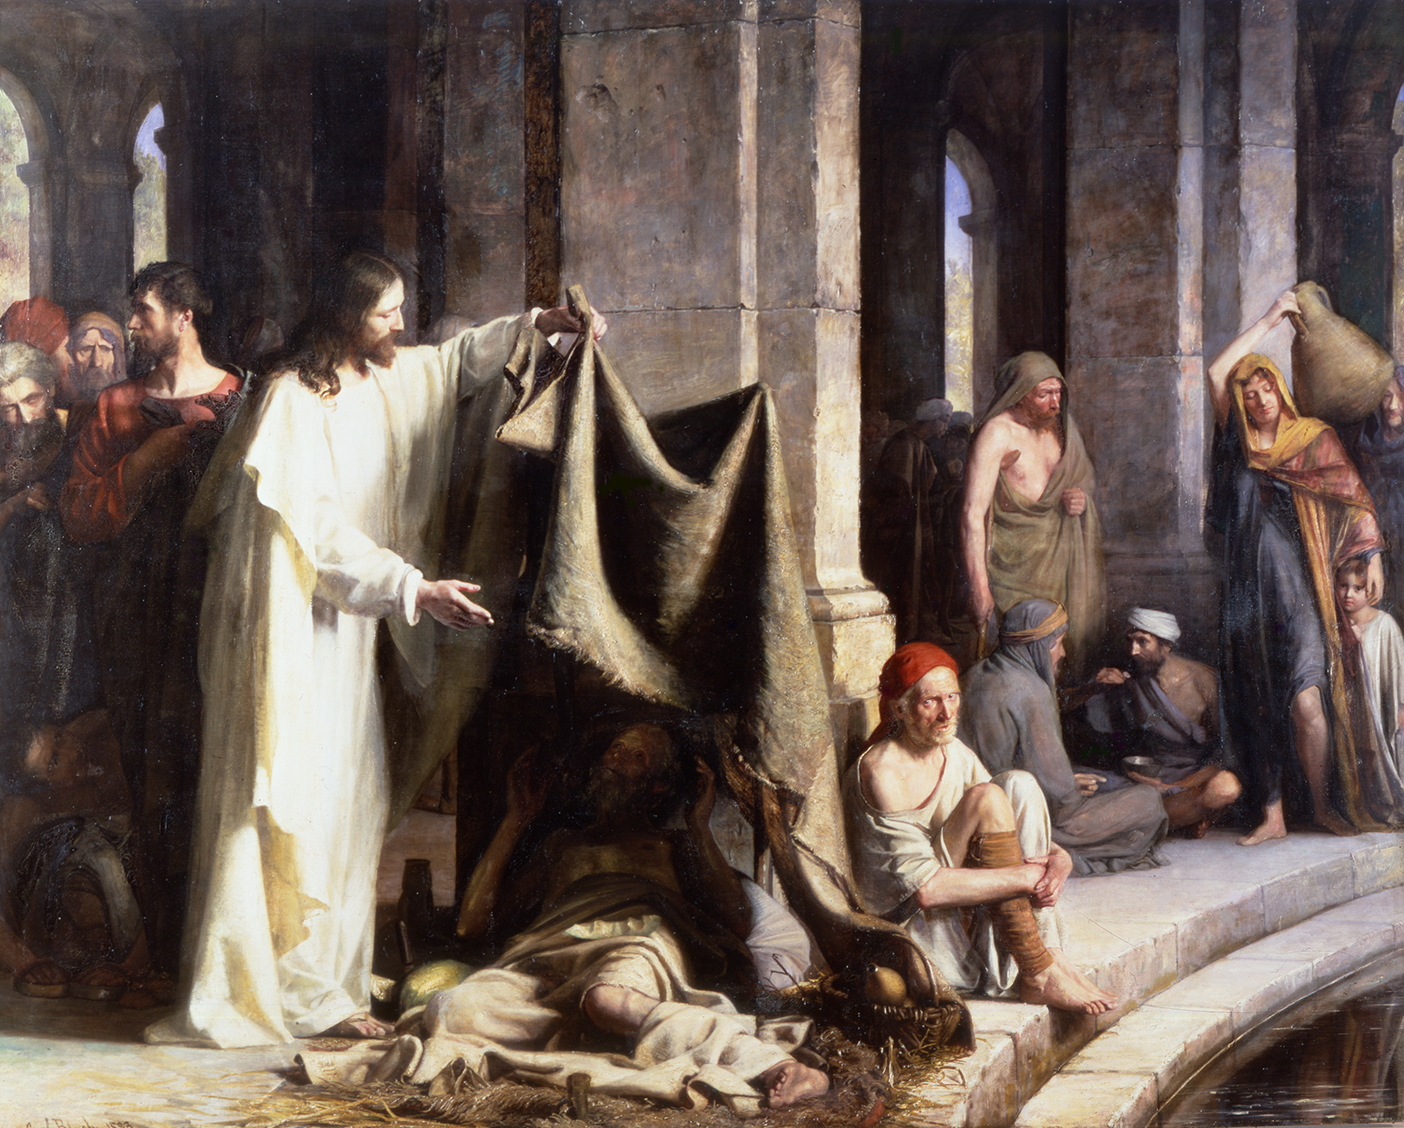 The painting "Christ Healing the Sick at the Pool of Bethesda"